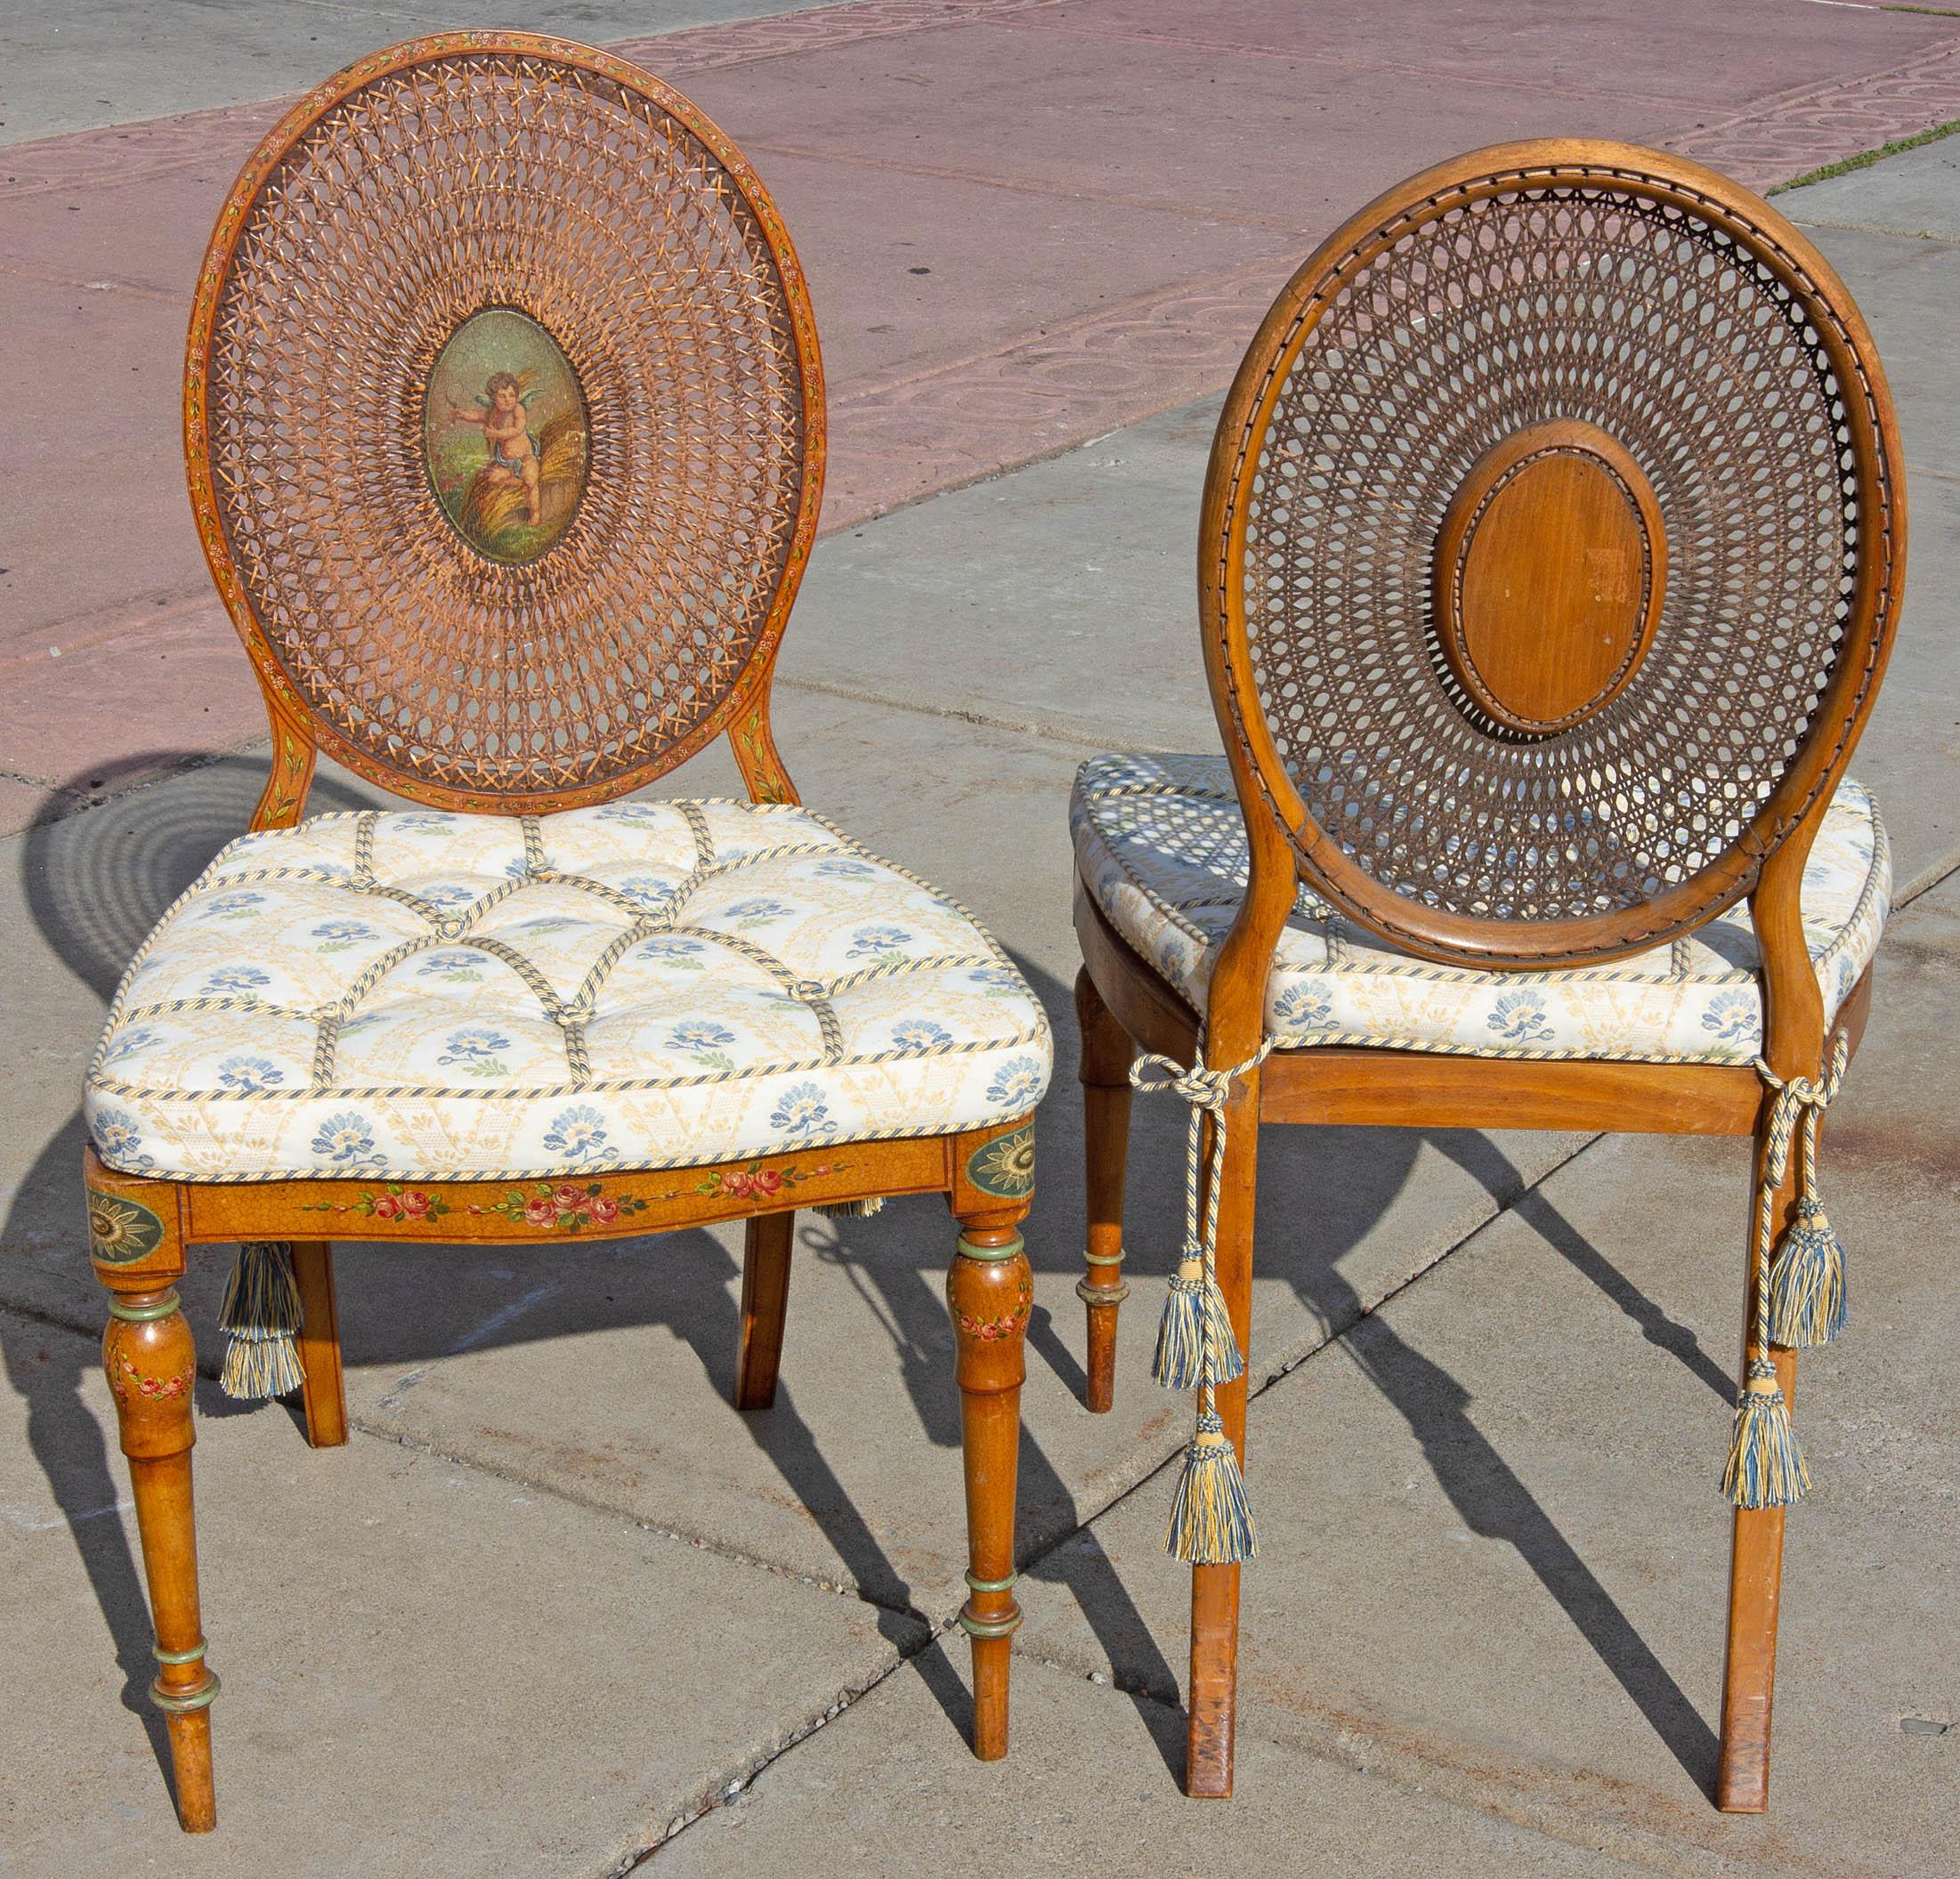 Antique Adams style side chairs. Finely hand painted. Caned backs and seats. Blue, cream, and gold brocade cushions. With silk cords and tassels, circa 1900. Upholstery in like new condition. Chairs are strong.
  